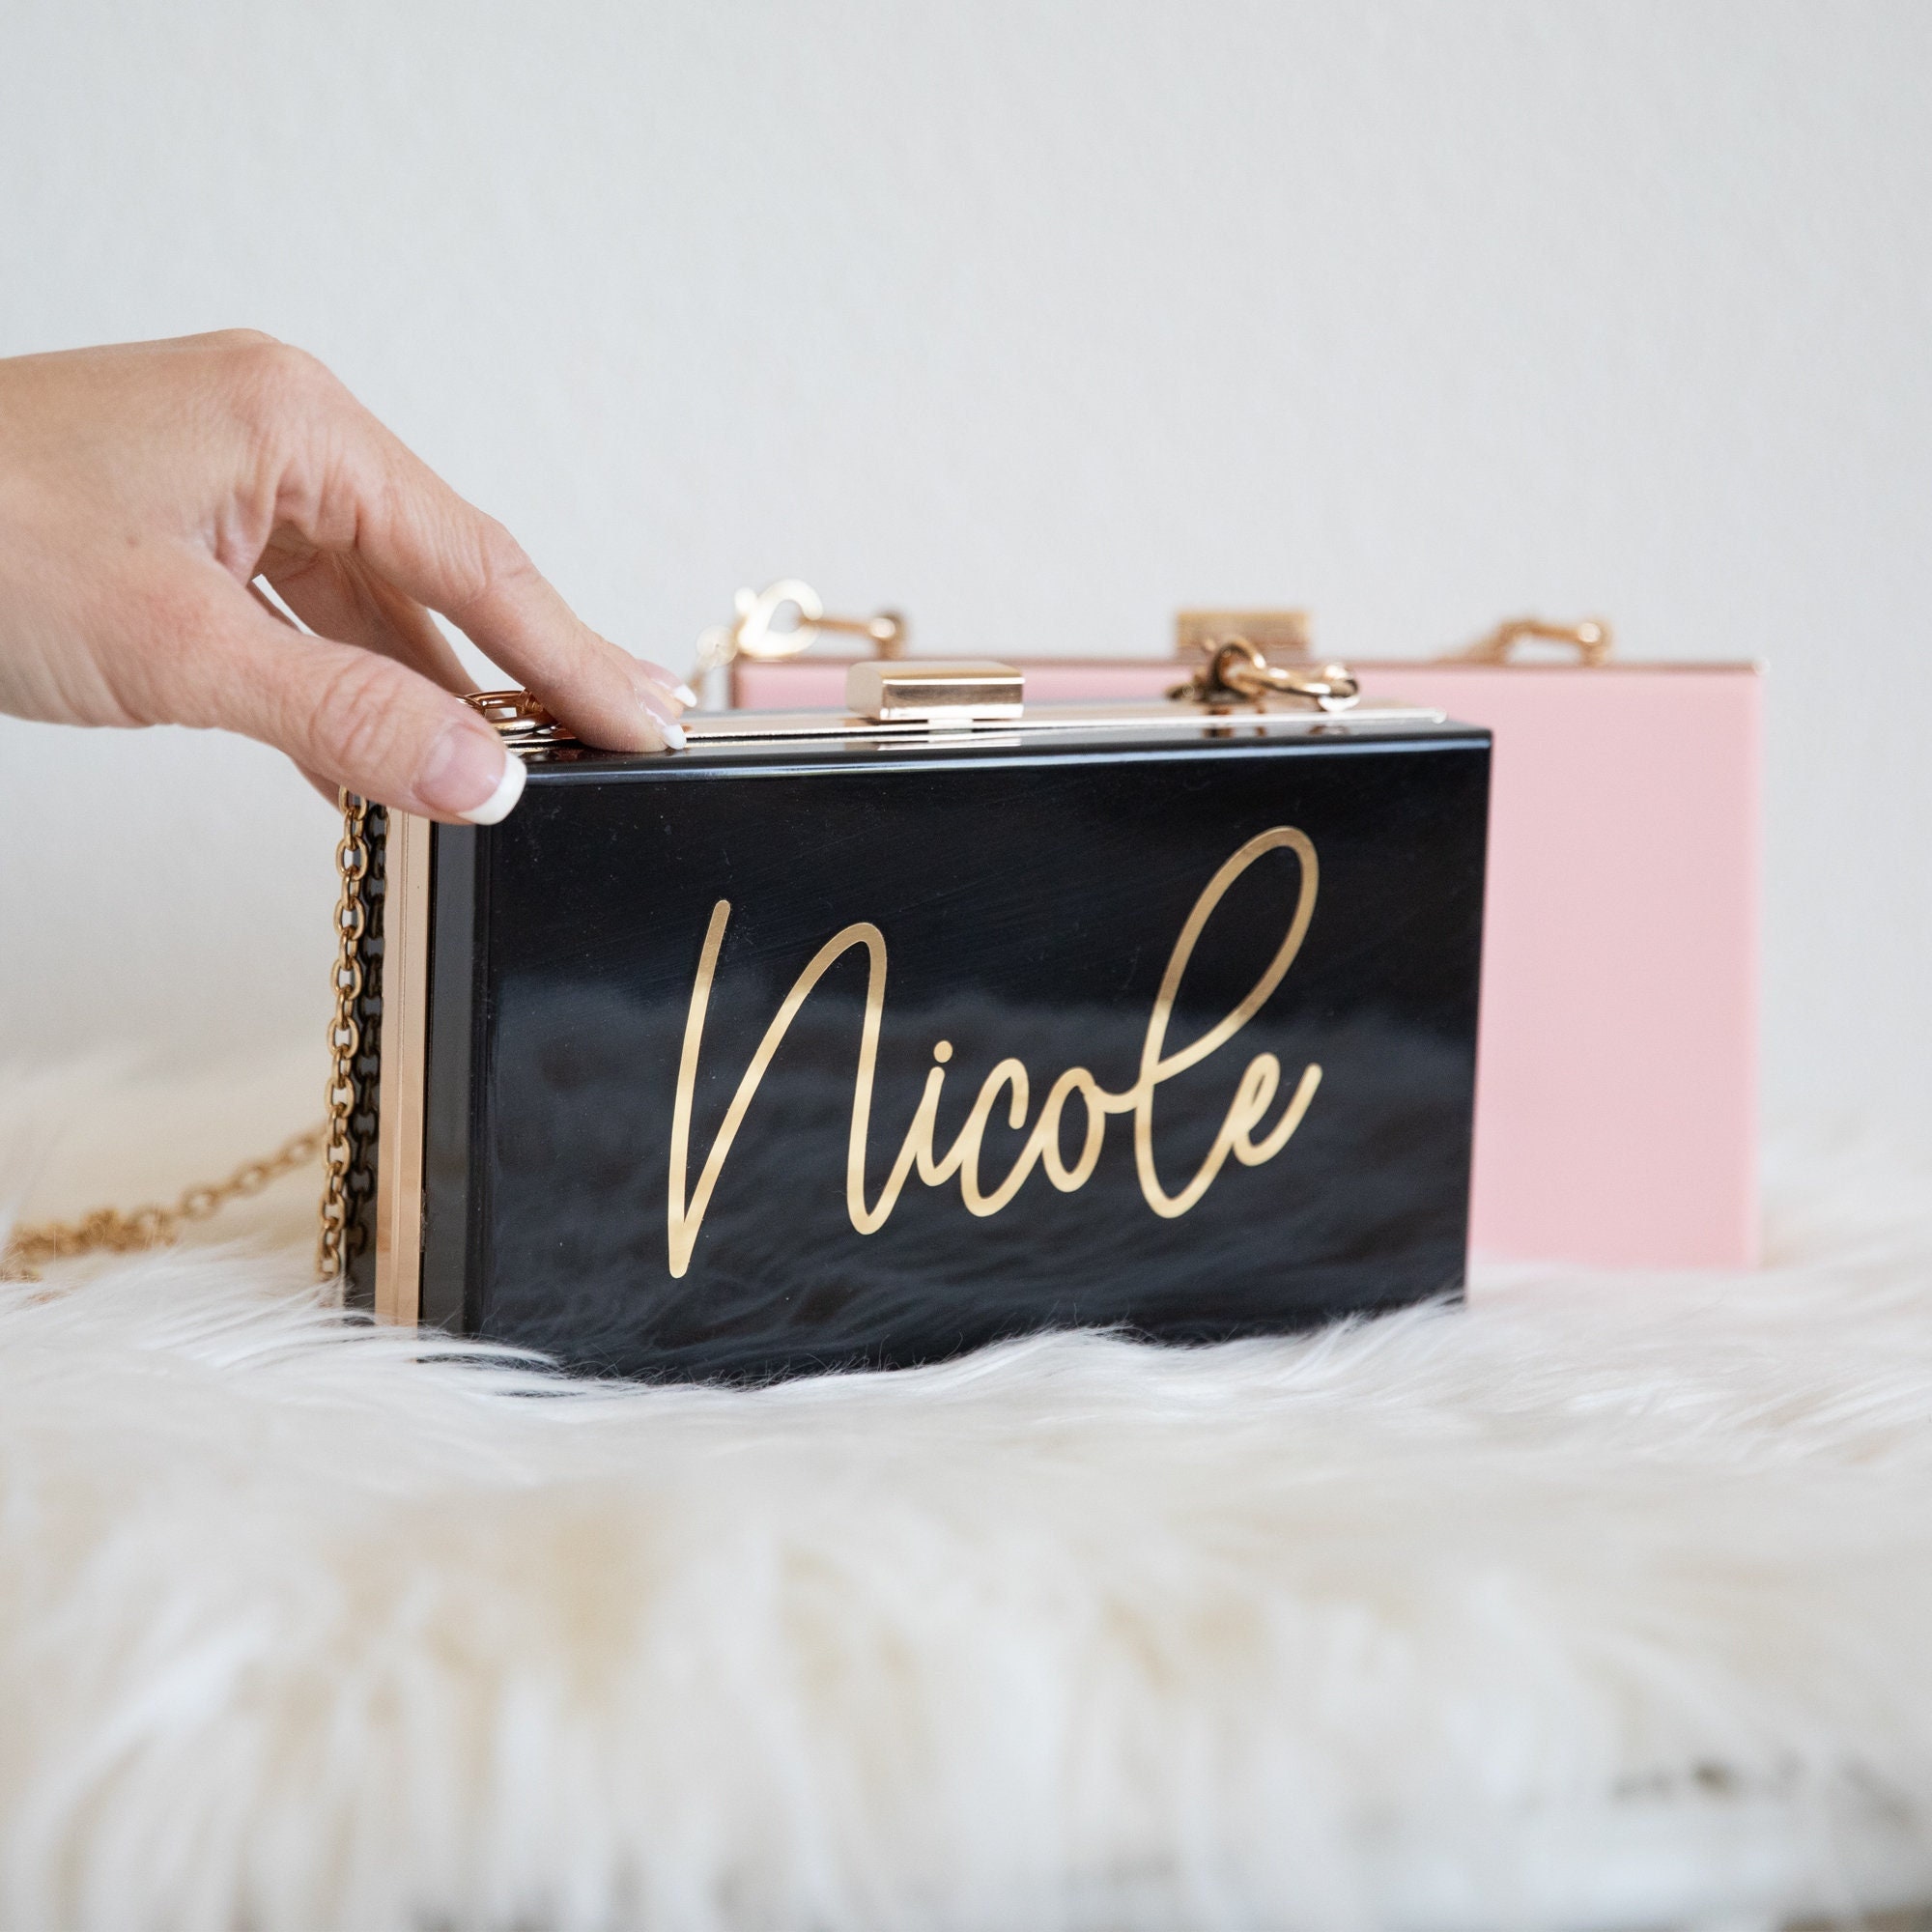 Wholesale Square Box Handbag Transparent Evening Bags, Cute Clear Acrylic  Plastic Neon Hard Frame Party Clutch Purse with Gold Chain Strap From  m.